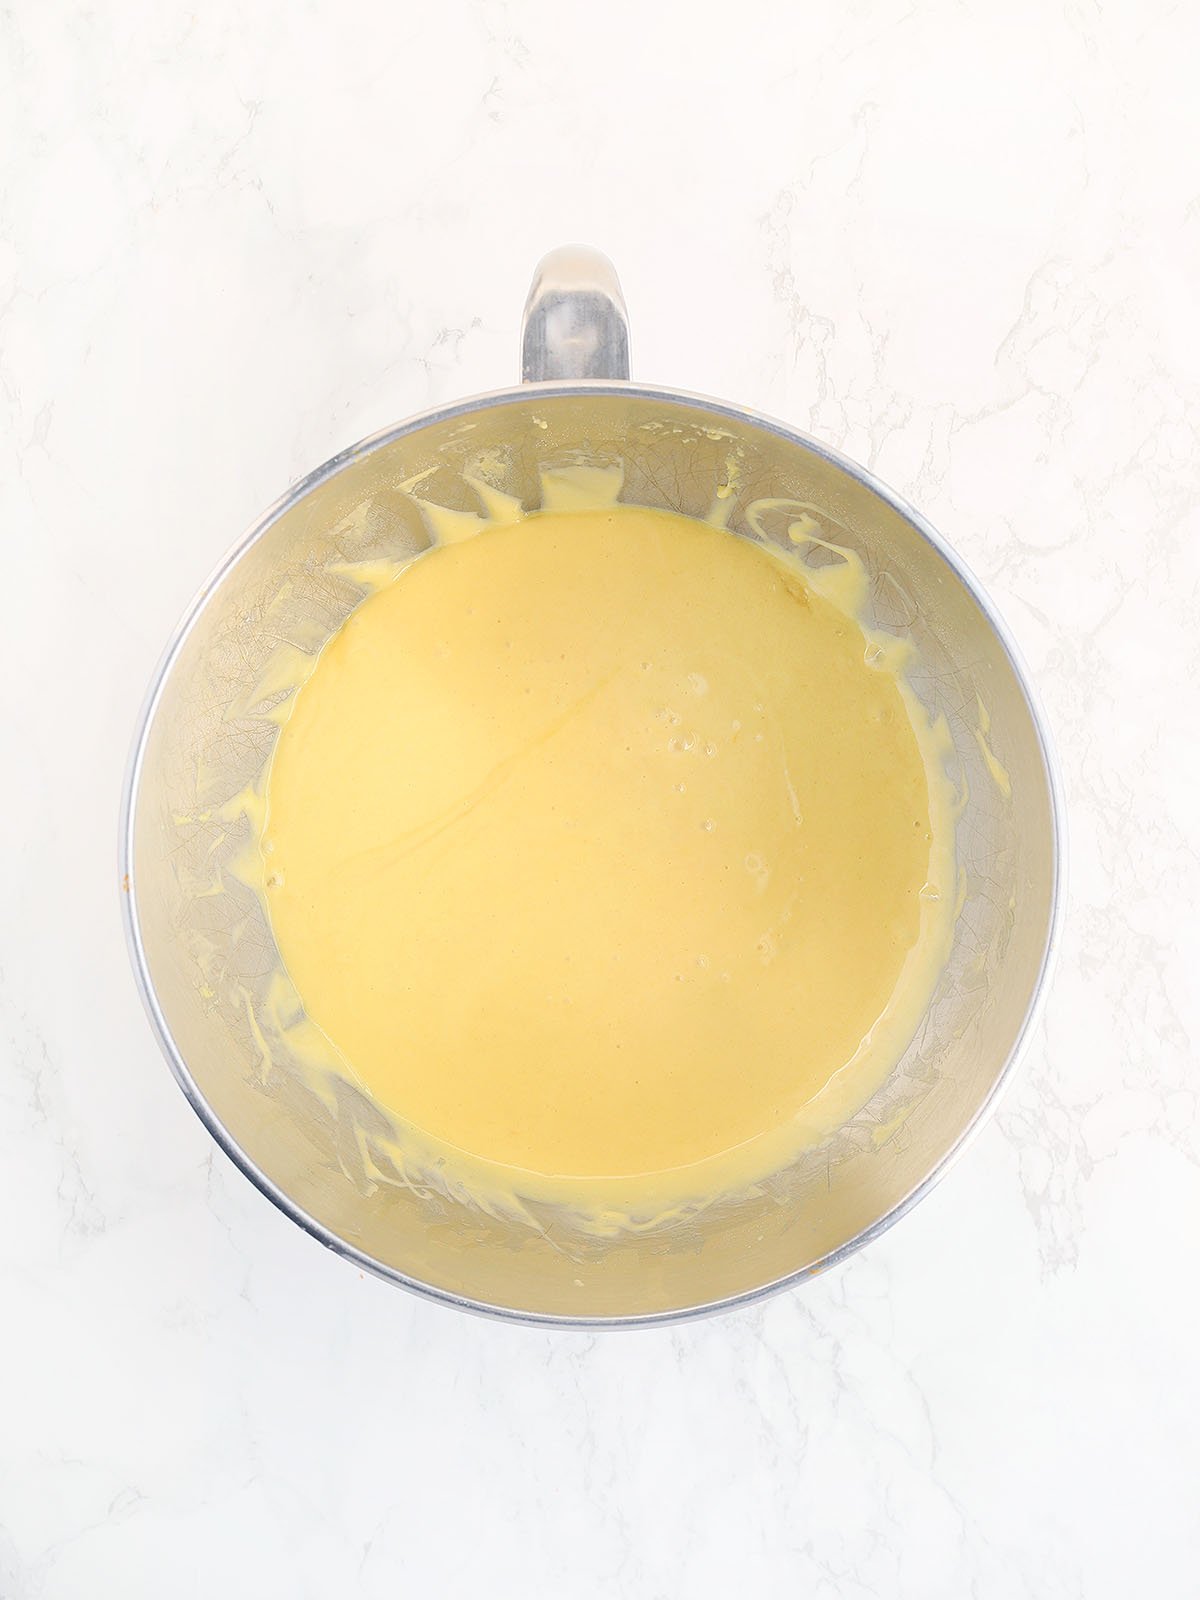 Apricot nectar cake batter after eggs have been added.